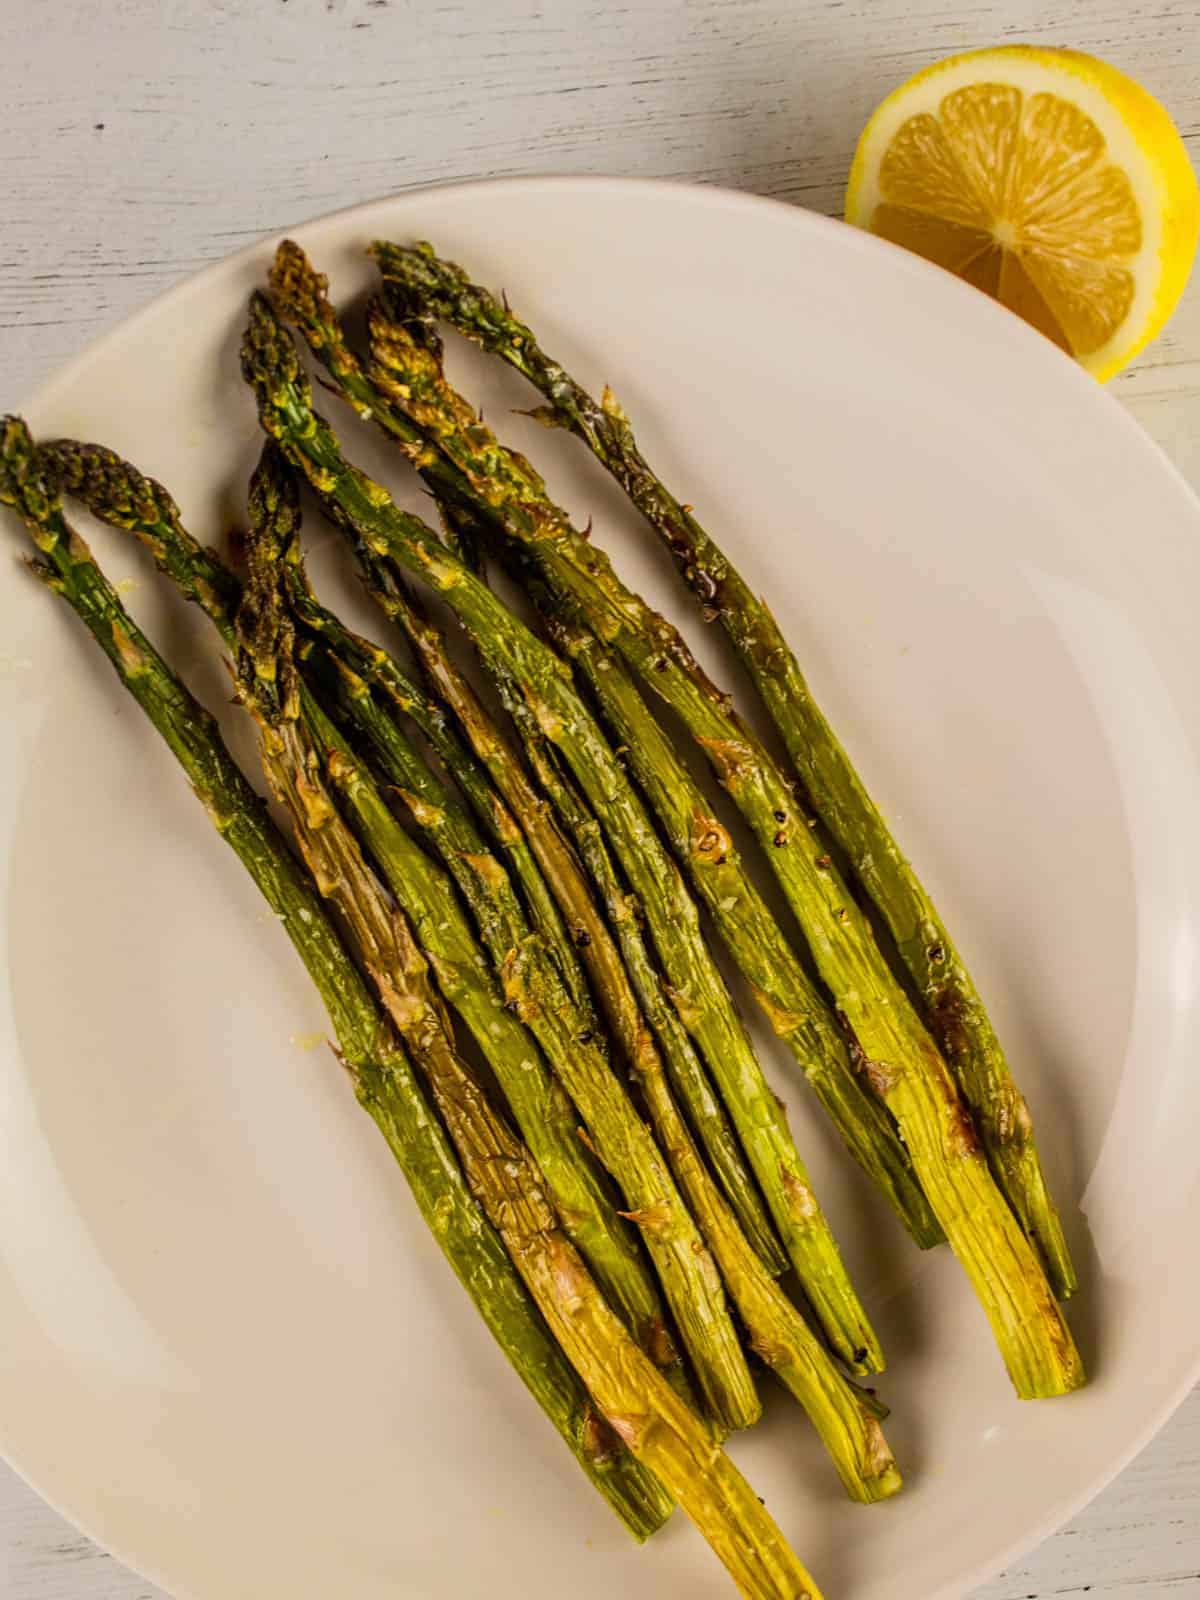 roasted asparagus stalks on a white plate with a lemon half next to it